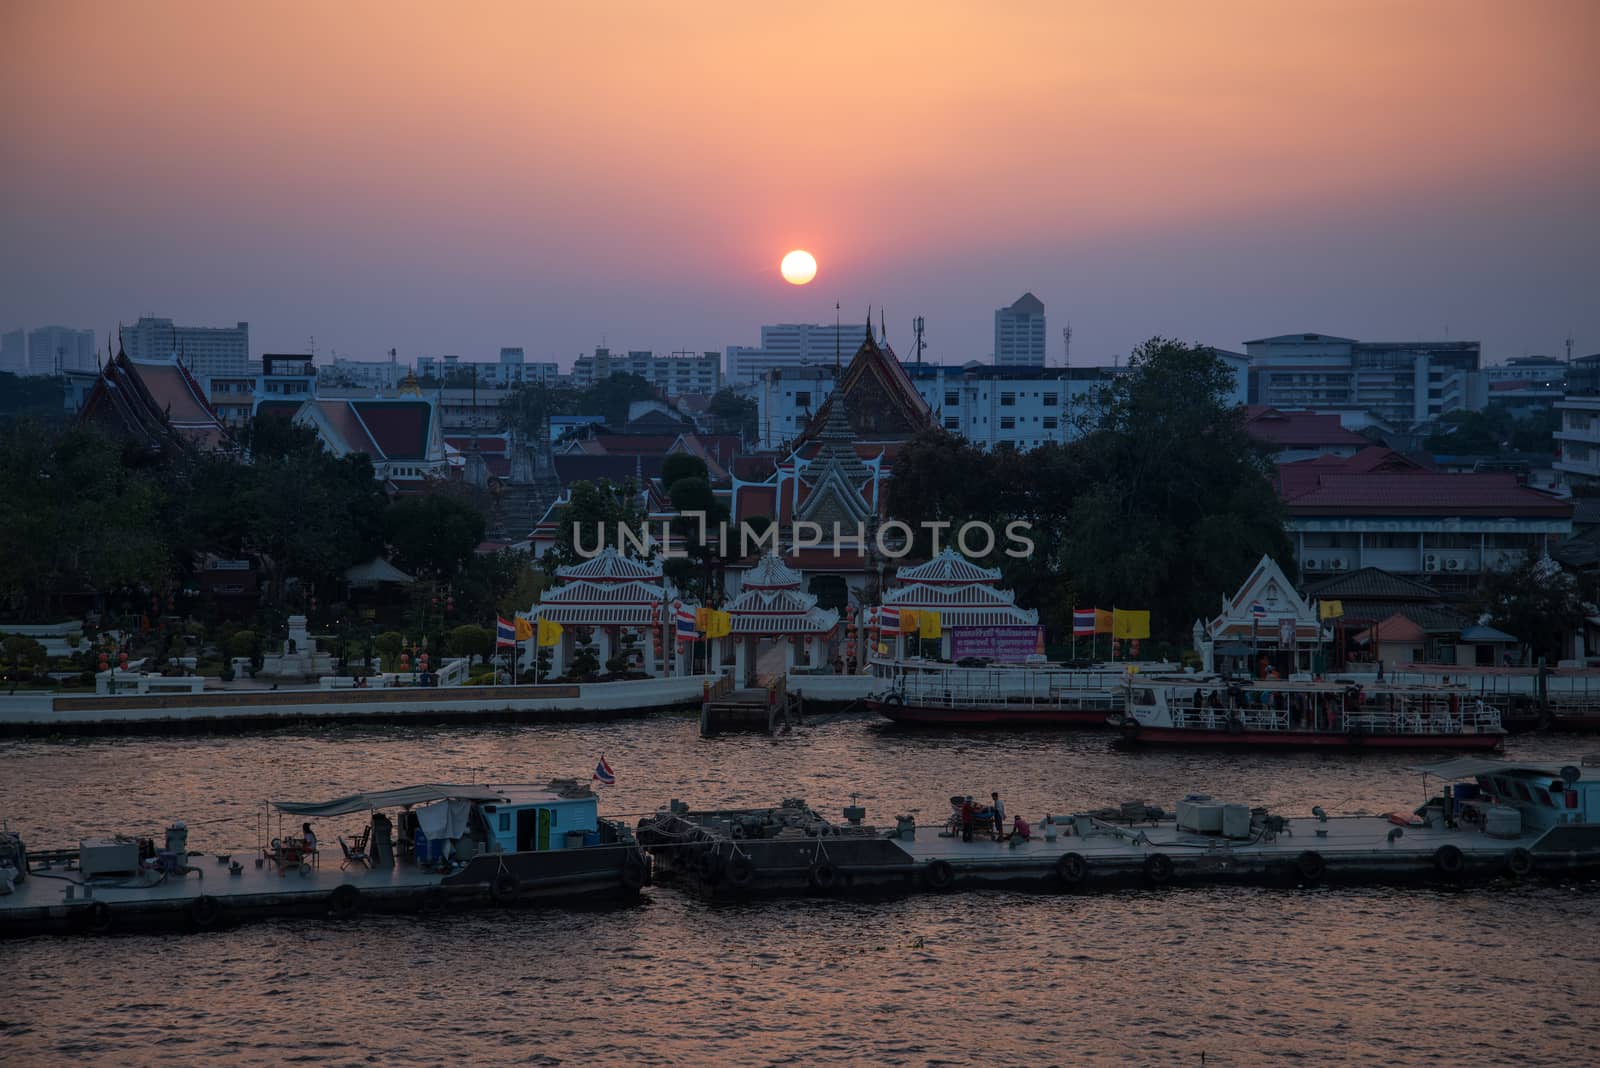 View of the Chao Phraya River in Bangkok, Thailand by jakgree